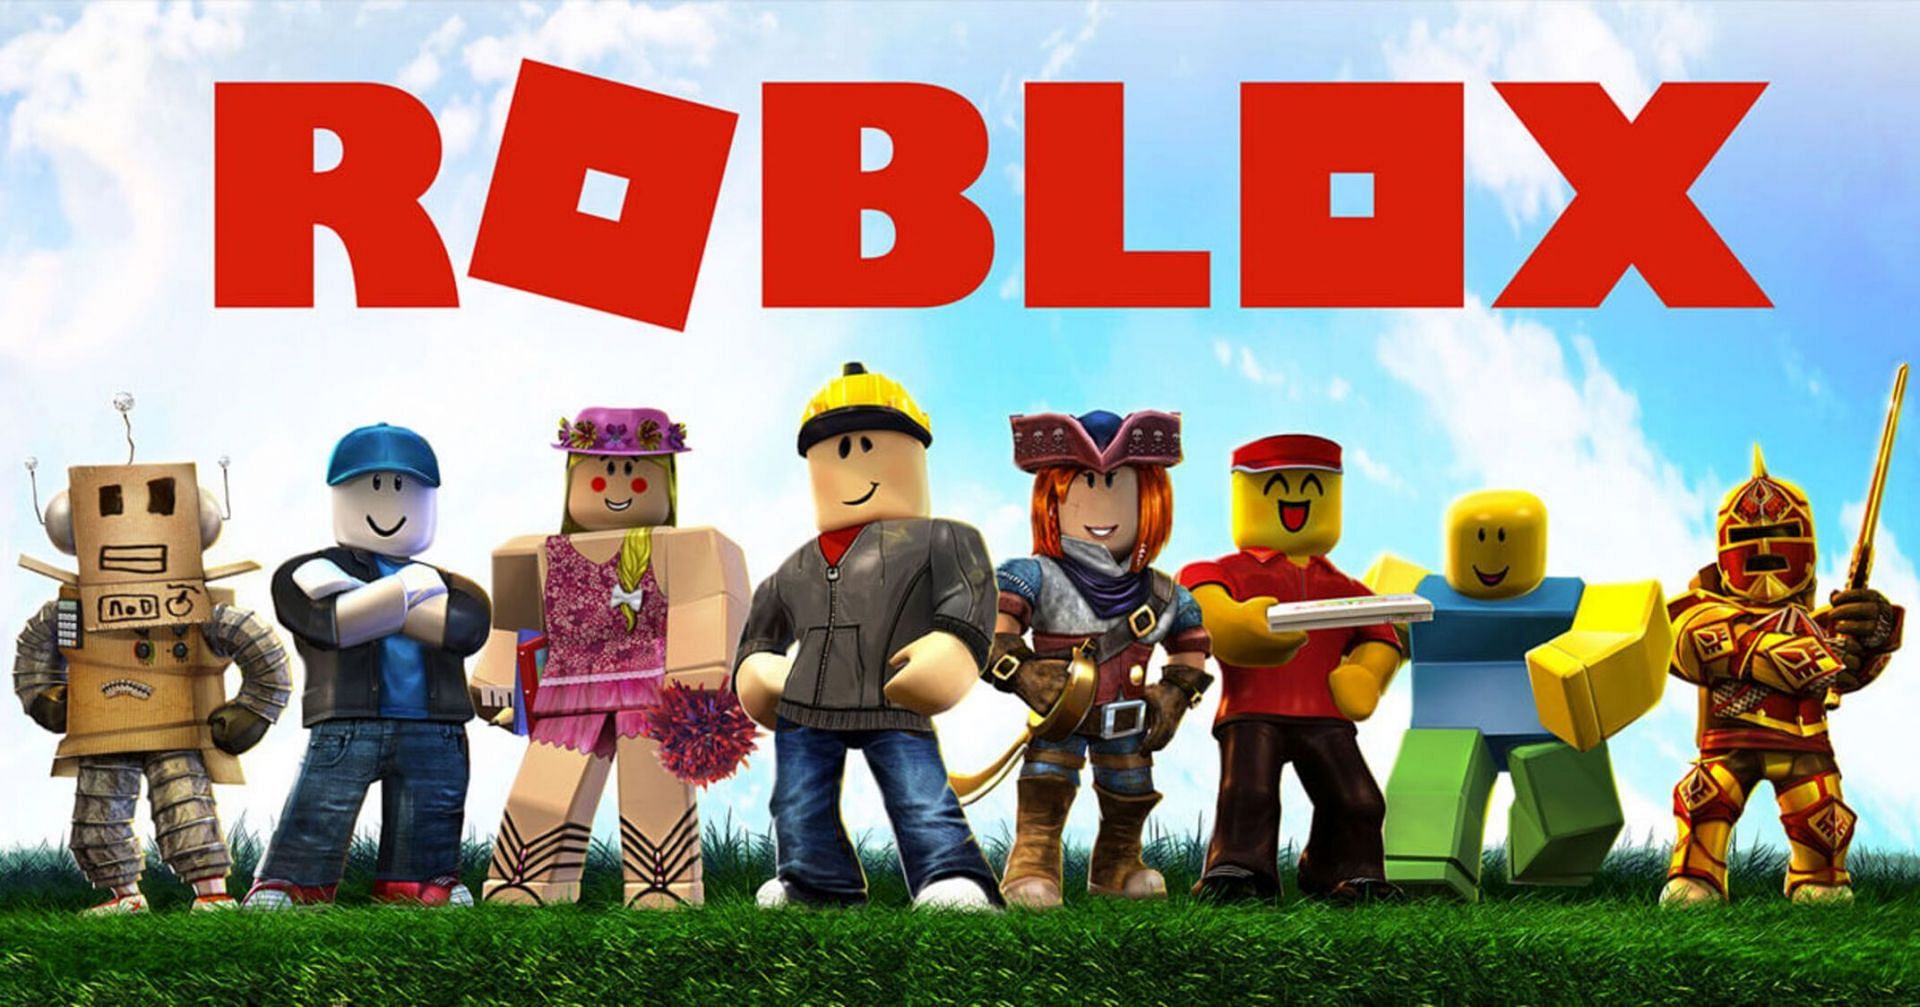 These are The TOP 3 #roblox #games with #vc ! #robloxgames, Tiktok Games